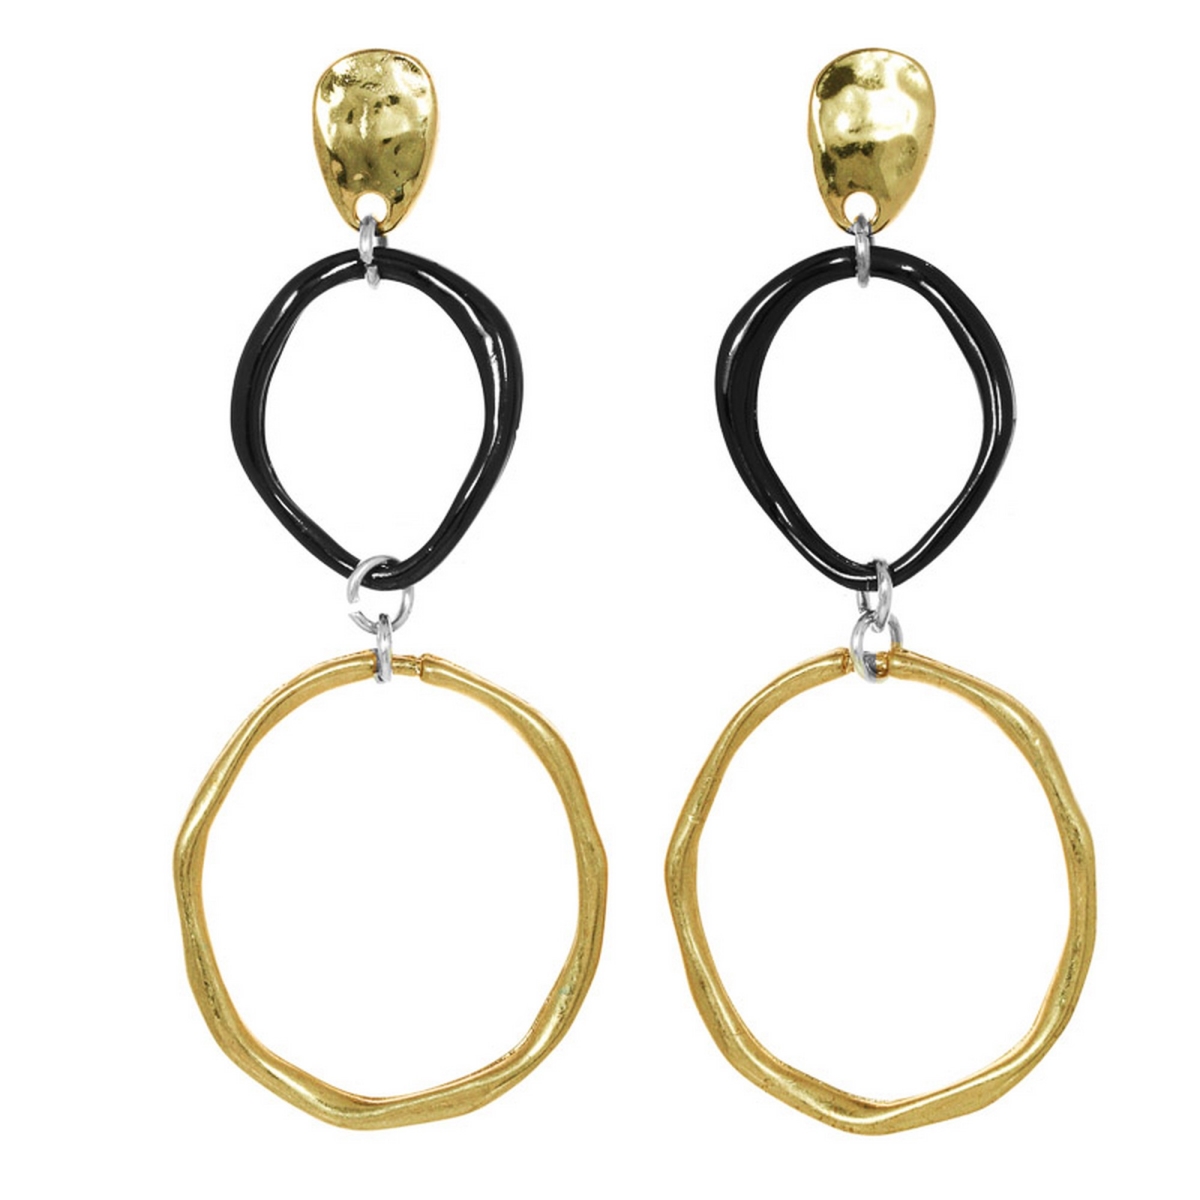 Picture of J&H Designs JHE9098 Hem Gold Cast Top Double Ring Earrings